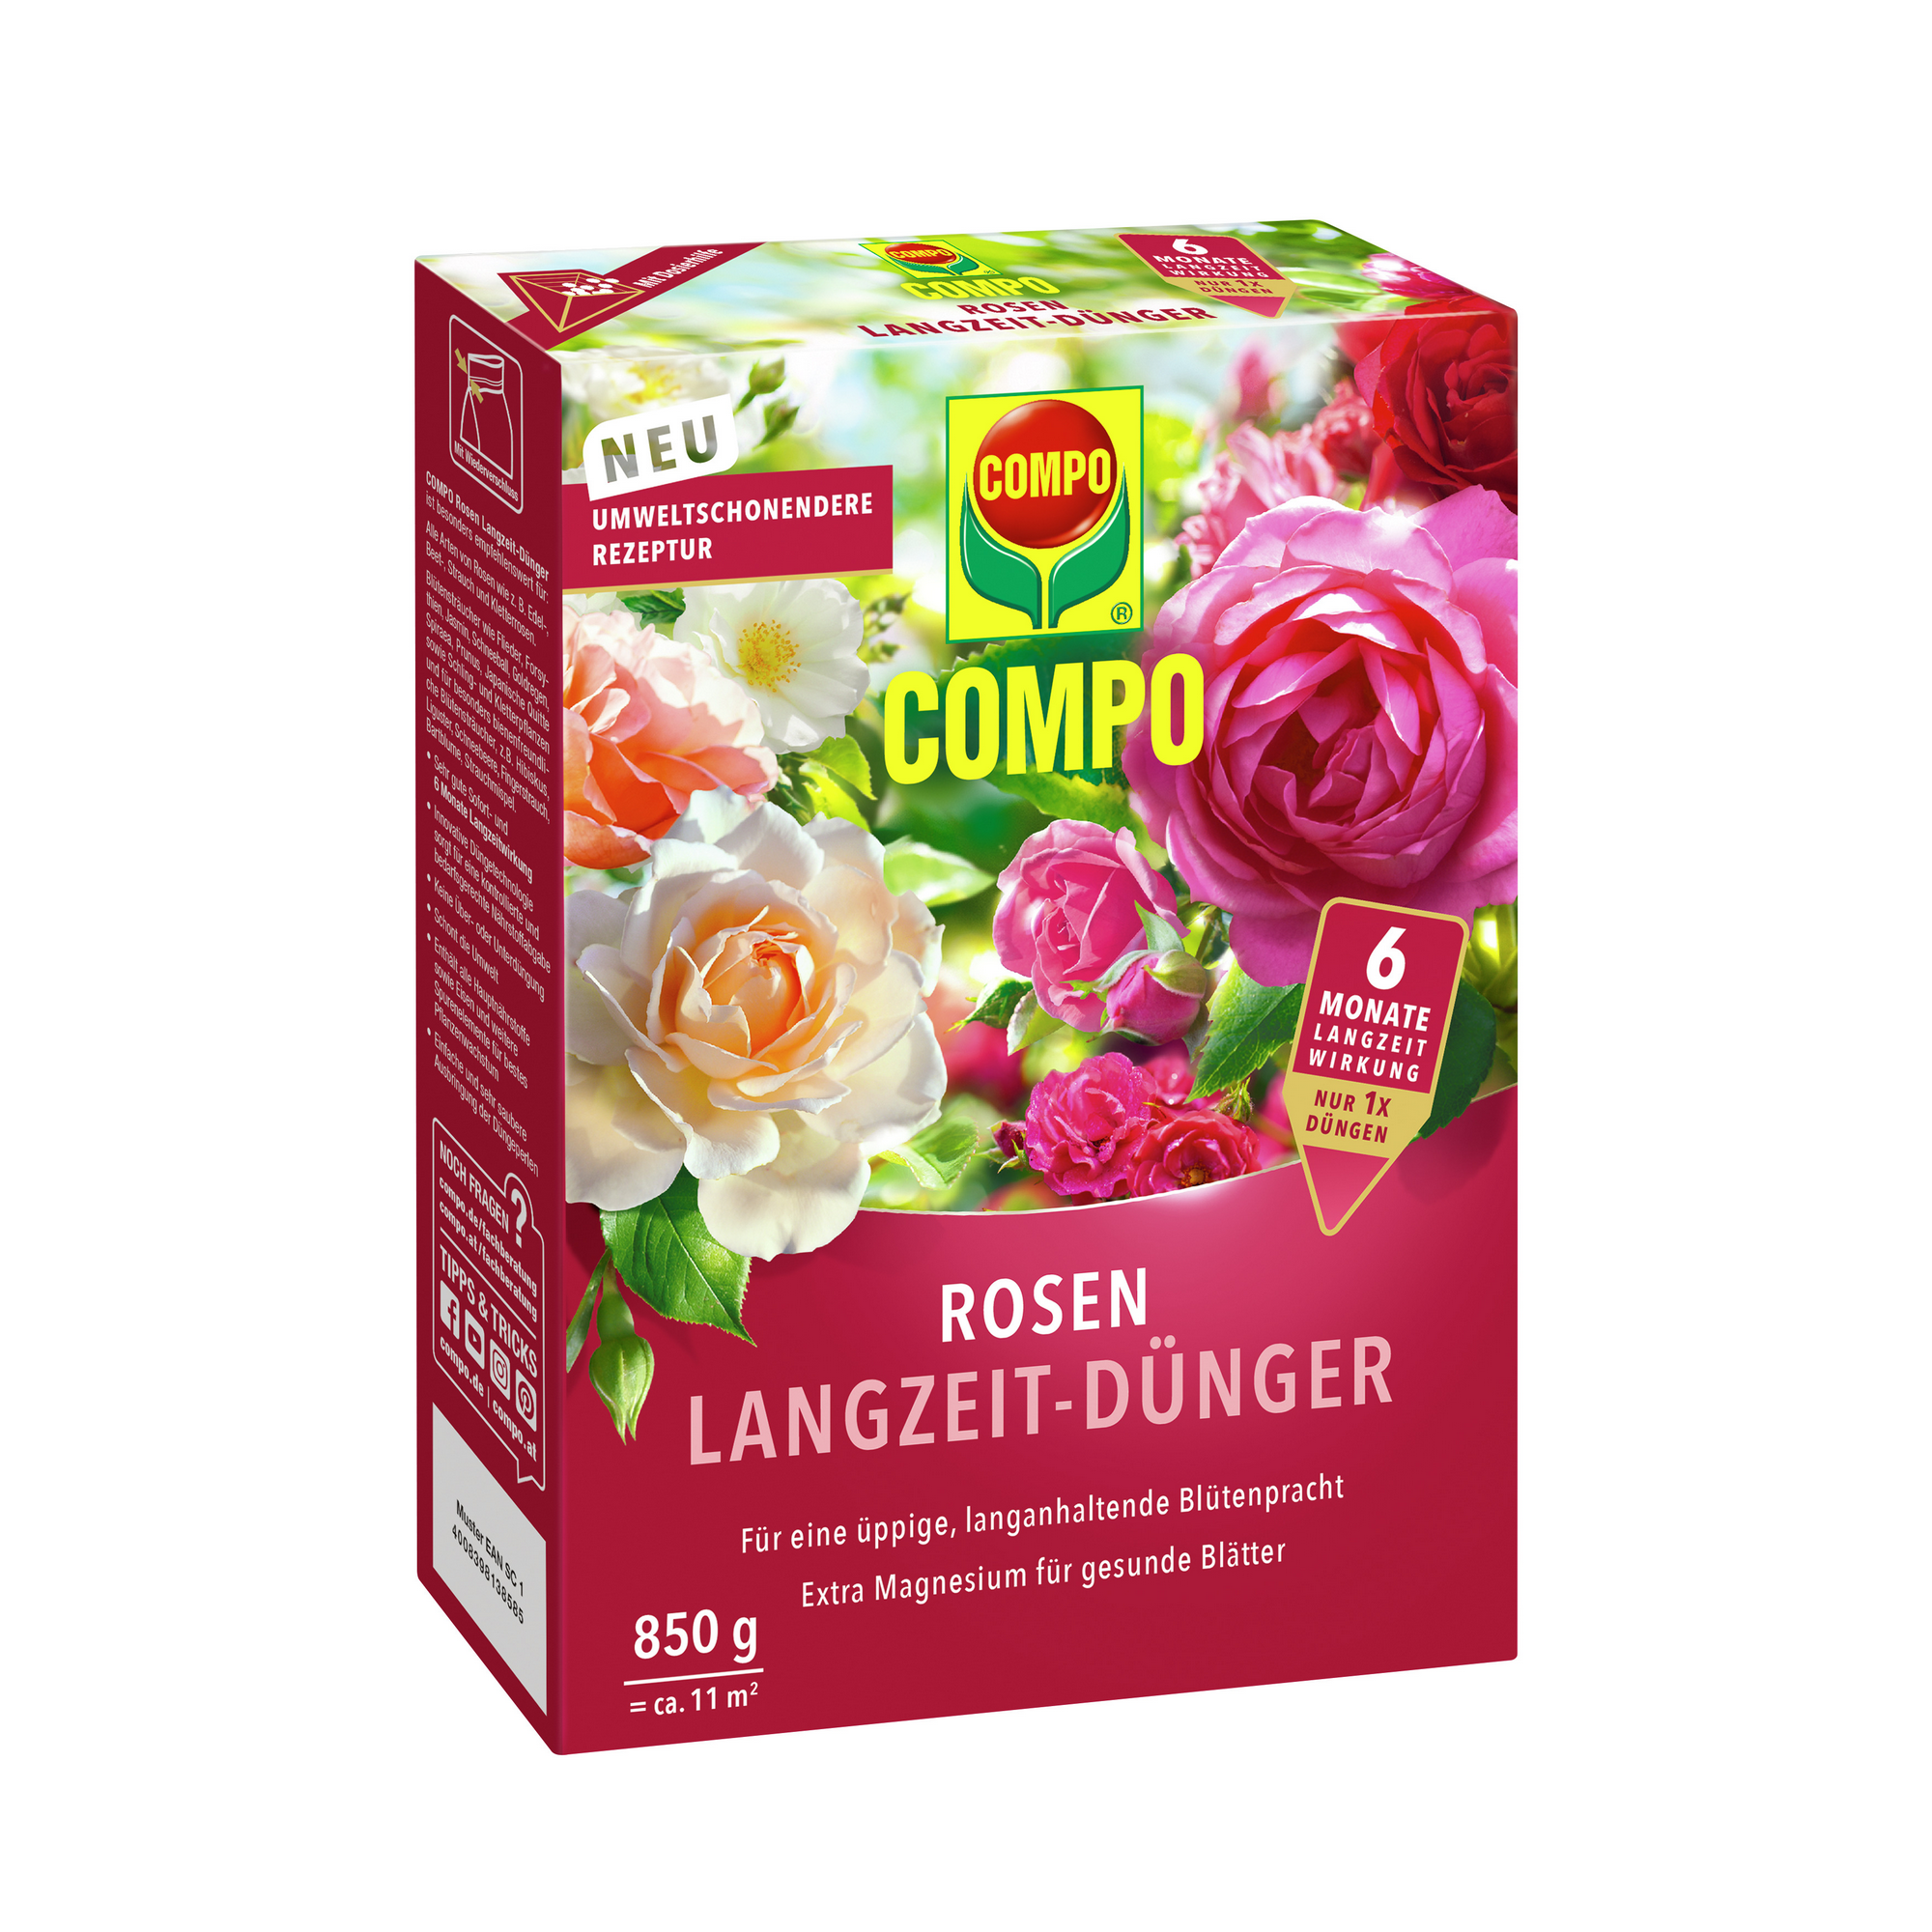 Rosen-Langzeitdünger 850 g + product picture